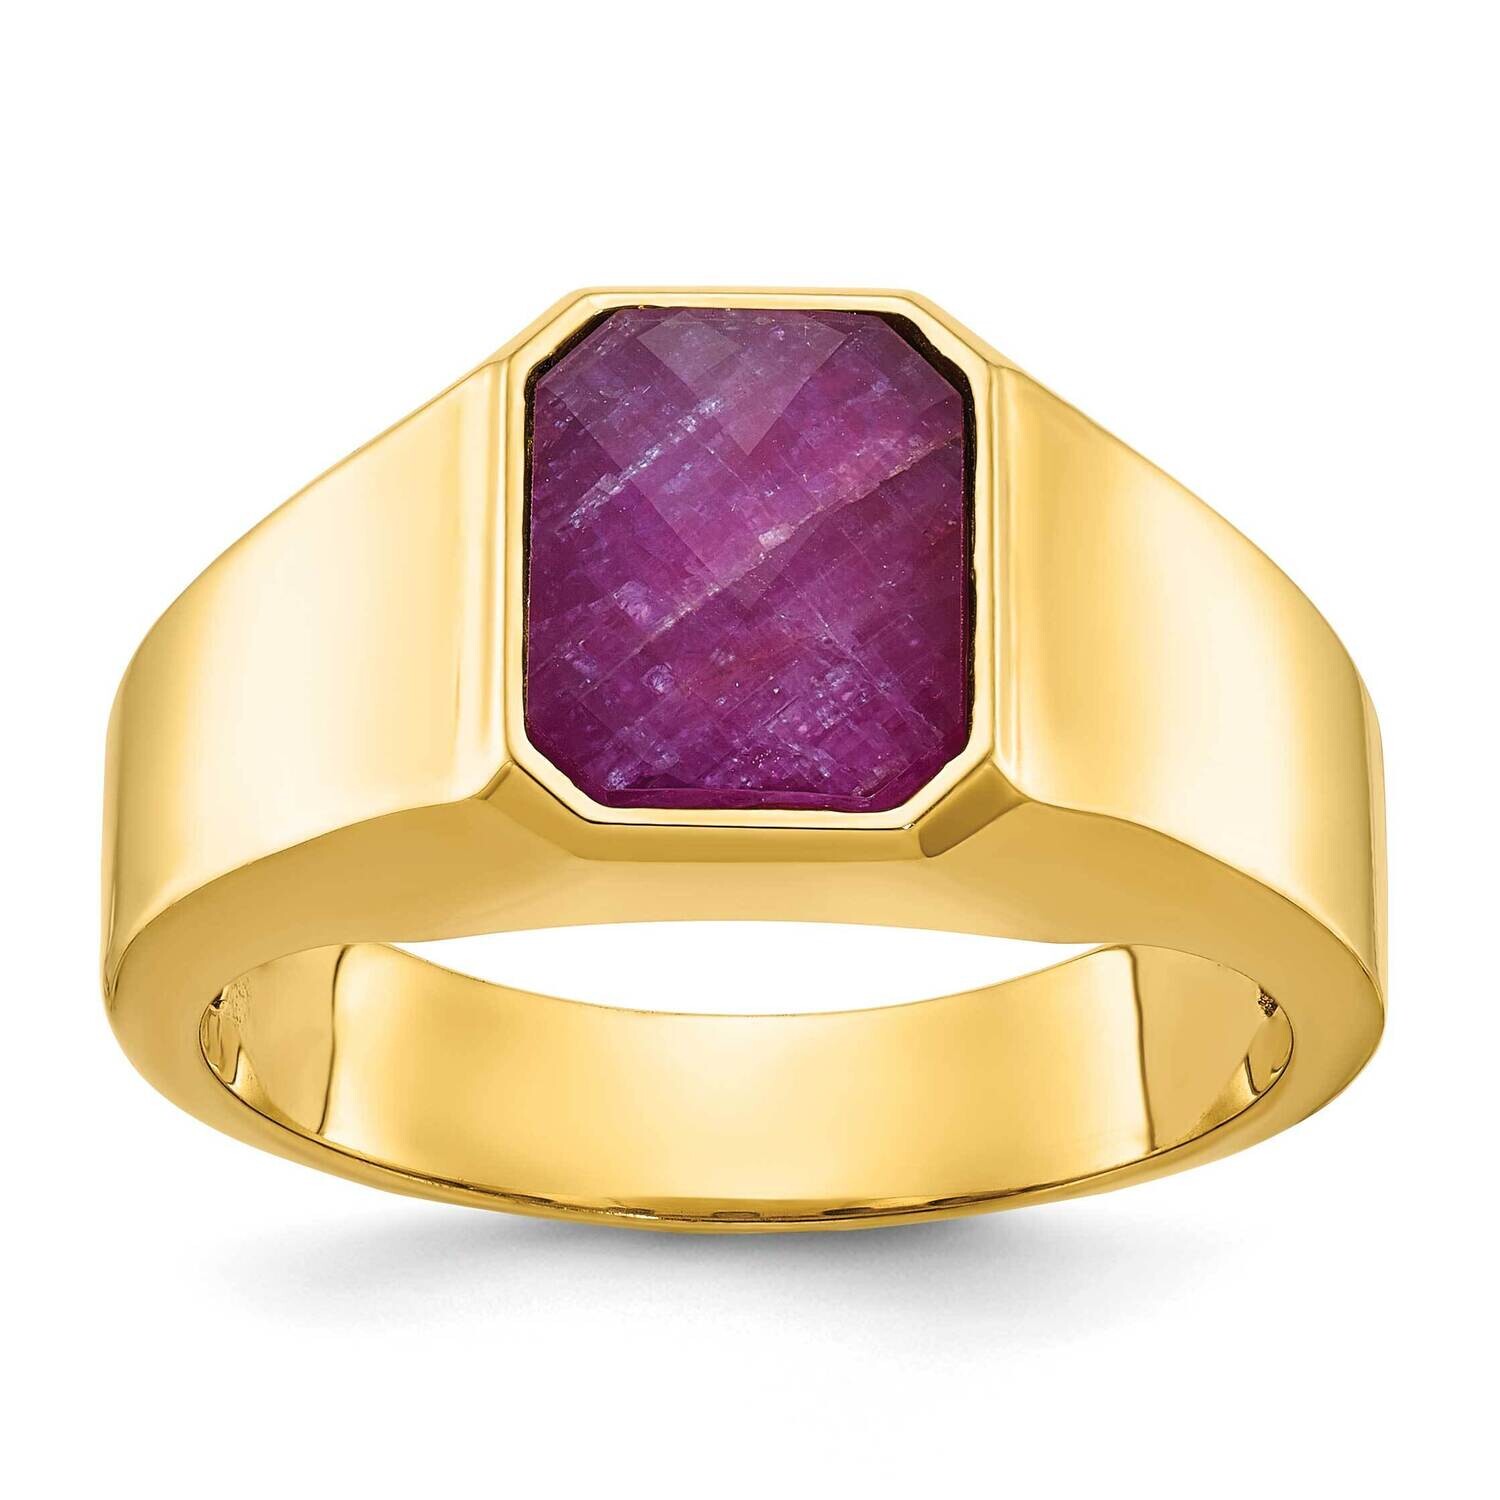 Ibgoodman Men's Ruby Doublet Stone Complete Ring 14k Gold B52129-4YCR